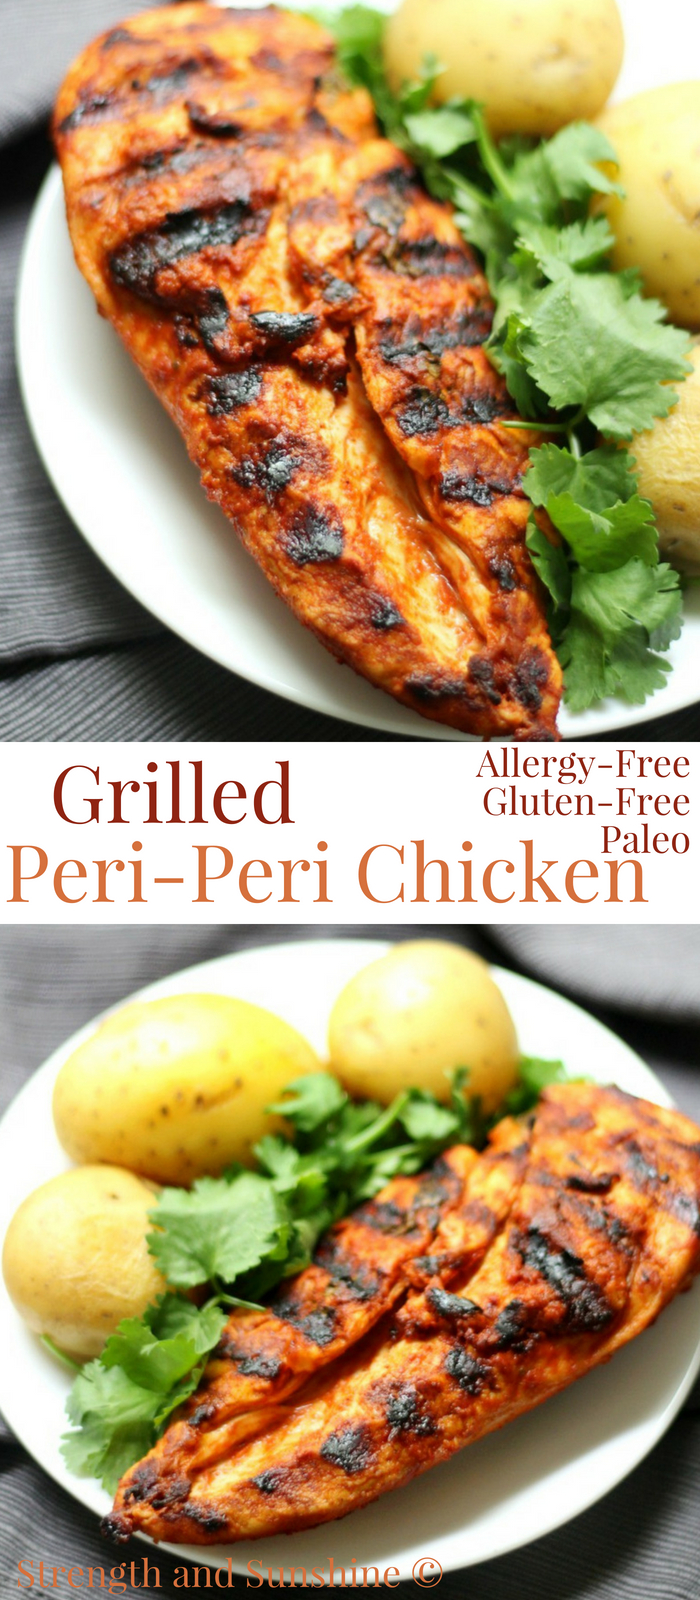 Grilled Peri-Peri Chicken (Gluten-Free, Paleo, Allergy-Free) | Strength and Sunshine @RebeccaGF666 A spicy North African recipe that will take your plain grilled chicken up a notch! Marinated in a spicy, zesty sauce, this Grilled Peri-Peri Chicken is loaded with flavor, gluten-free, paleo, top 8 allergy-free, and perfect for any cookout, bbq, or dinner! #chicken #periperi #grilling #glutenfree #paleo #grilledchicken #strengthandsunshine